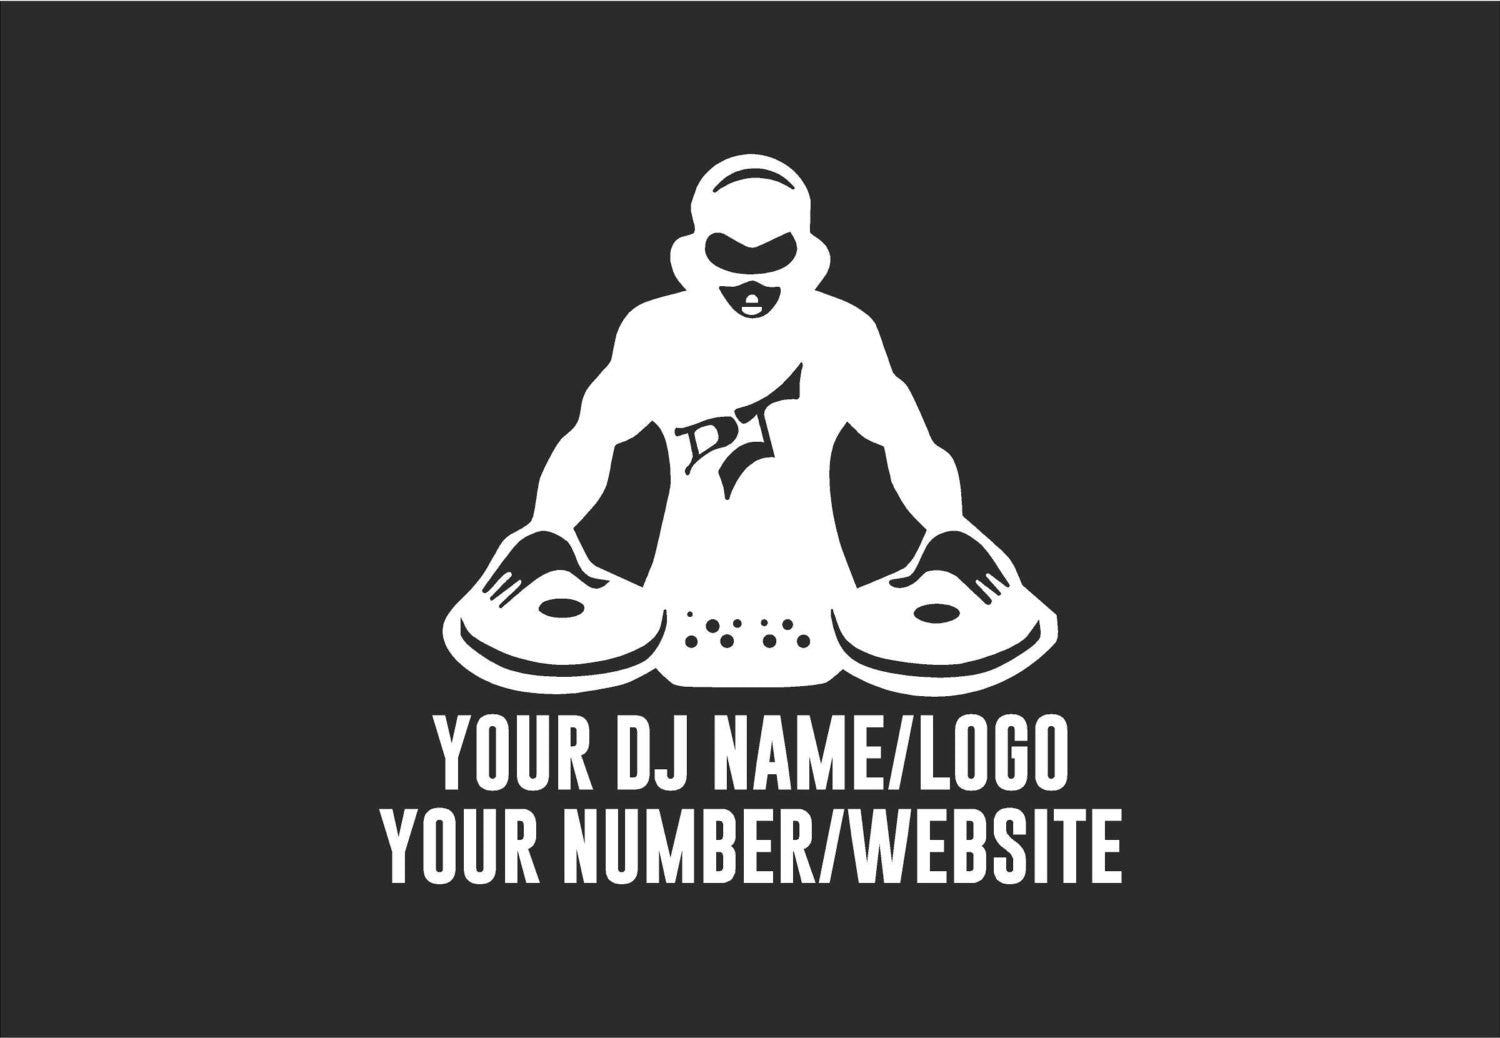 Customizeable DJ/Producer Vinyl Decal with 